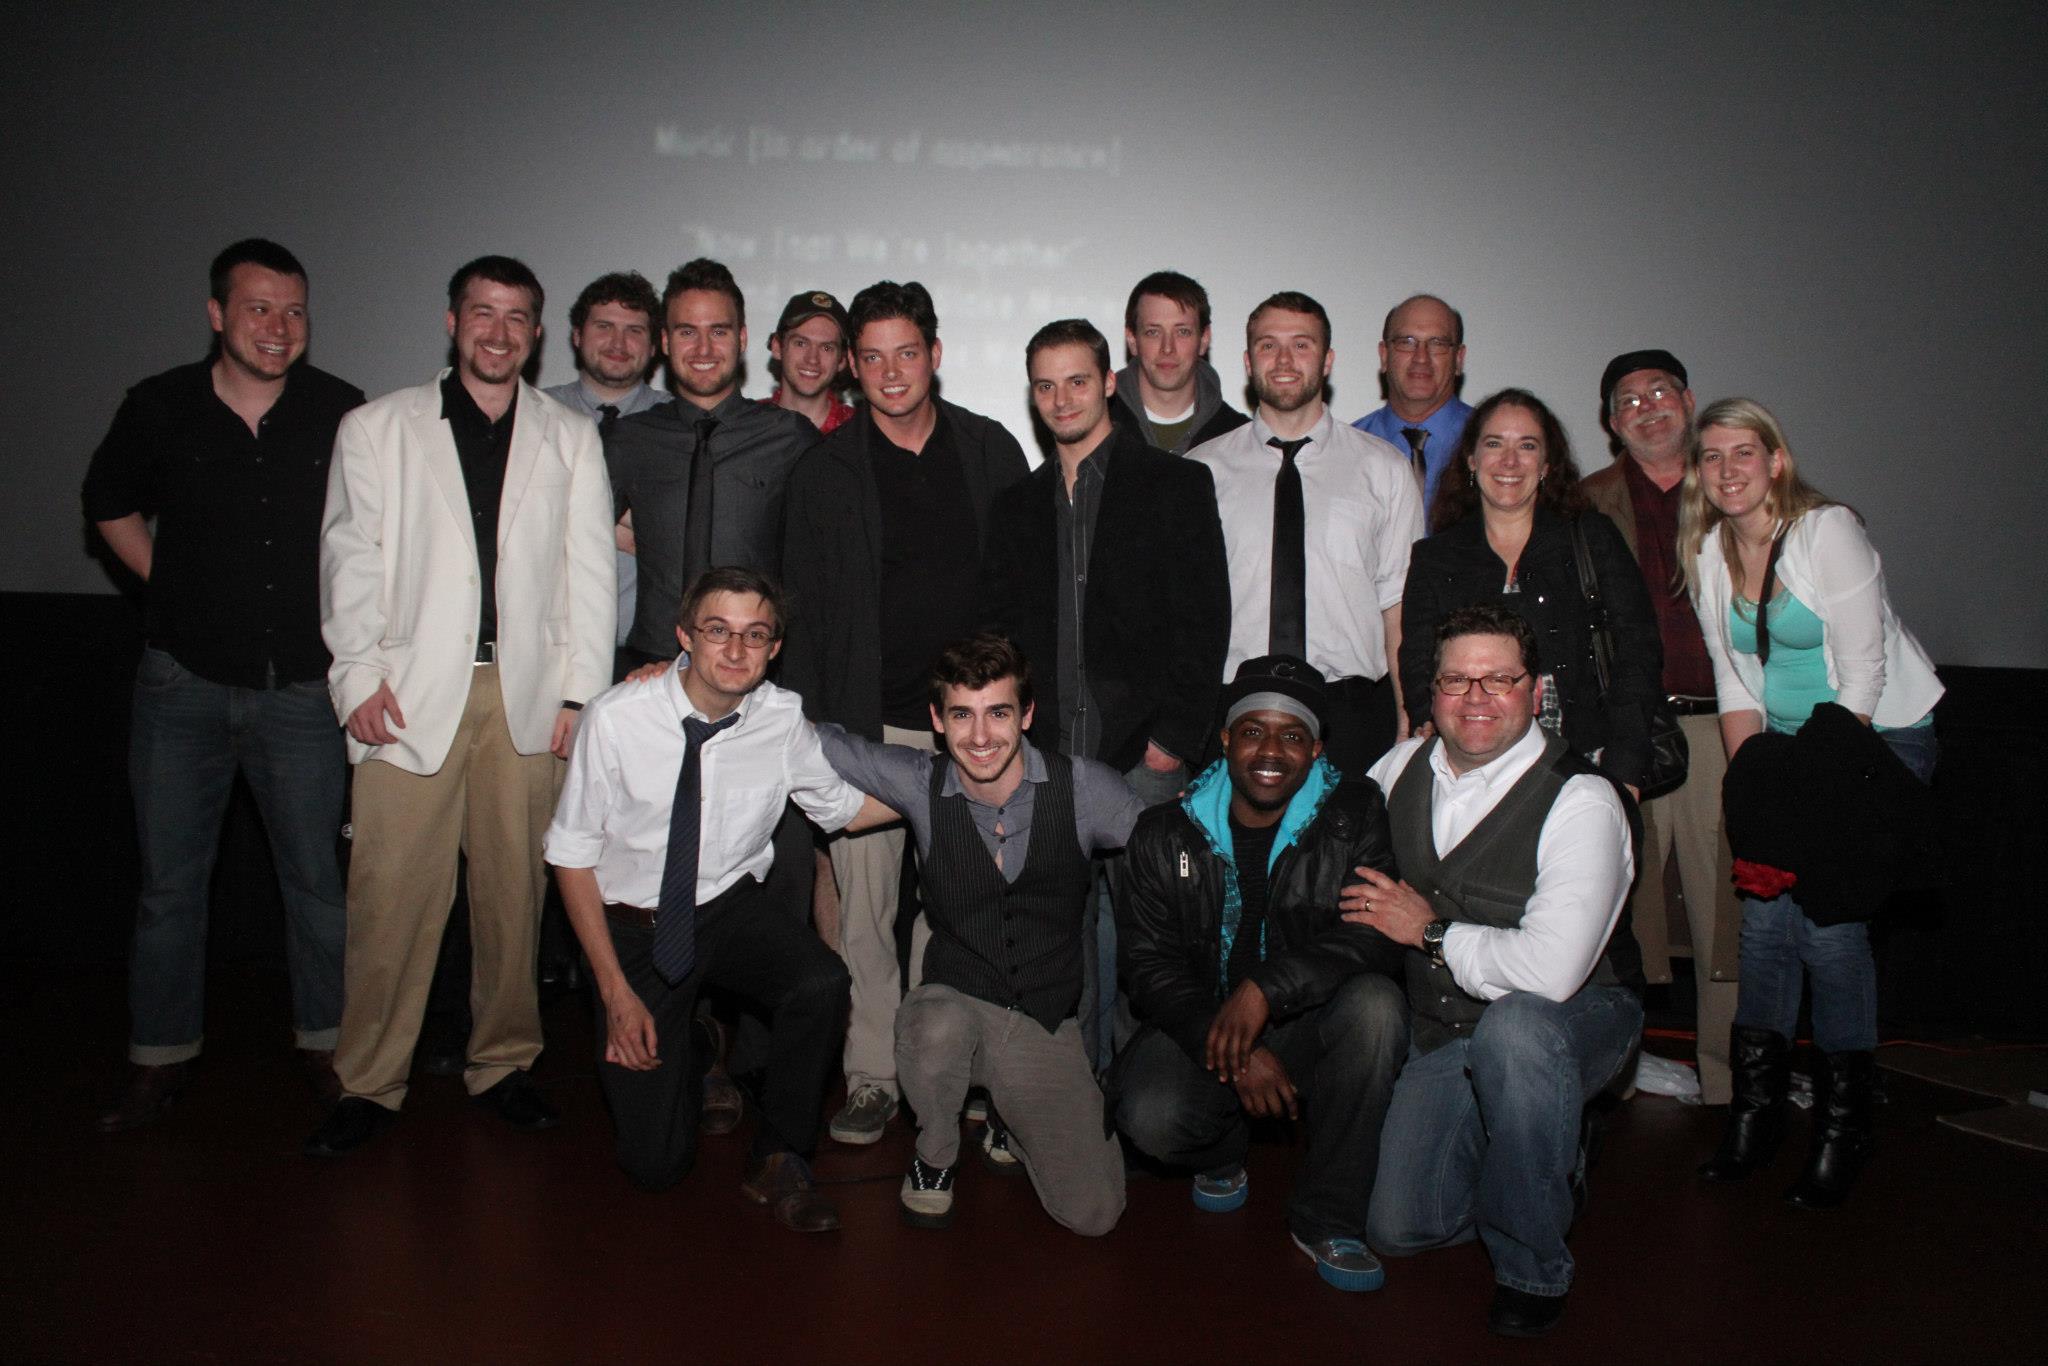 Some of the cast and crew of 'New World OrdeRx' strike a pose during an exclusive screening of the film in Muncie, IN